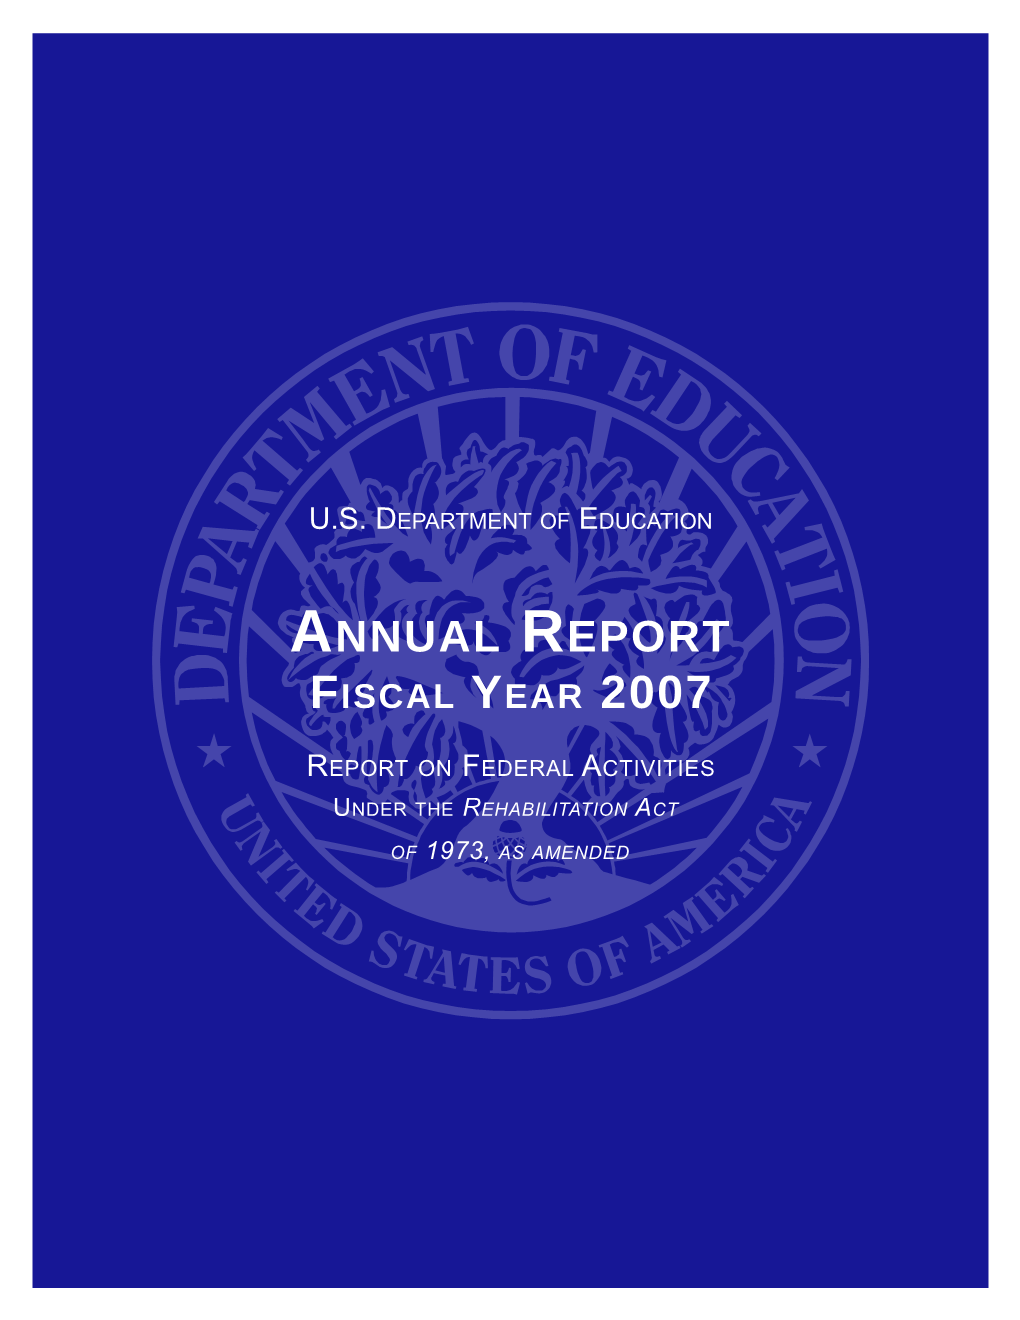 Annual Report, Fiscal Year 2007, Report on Federal Activities Under the Rehabilitation